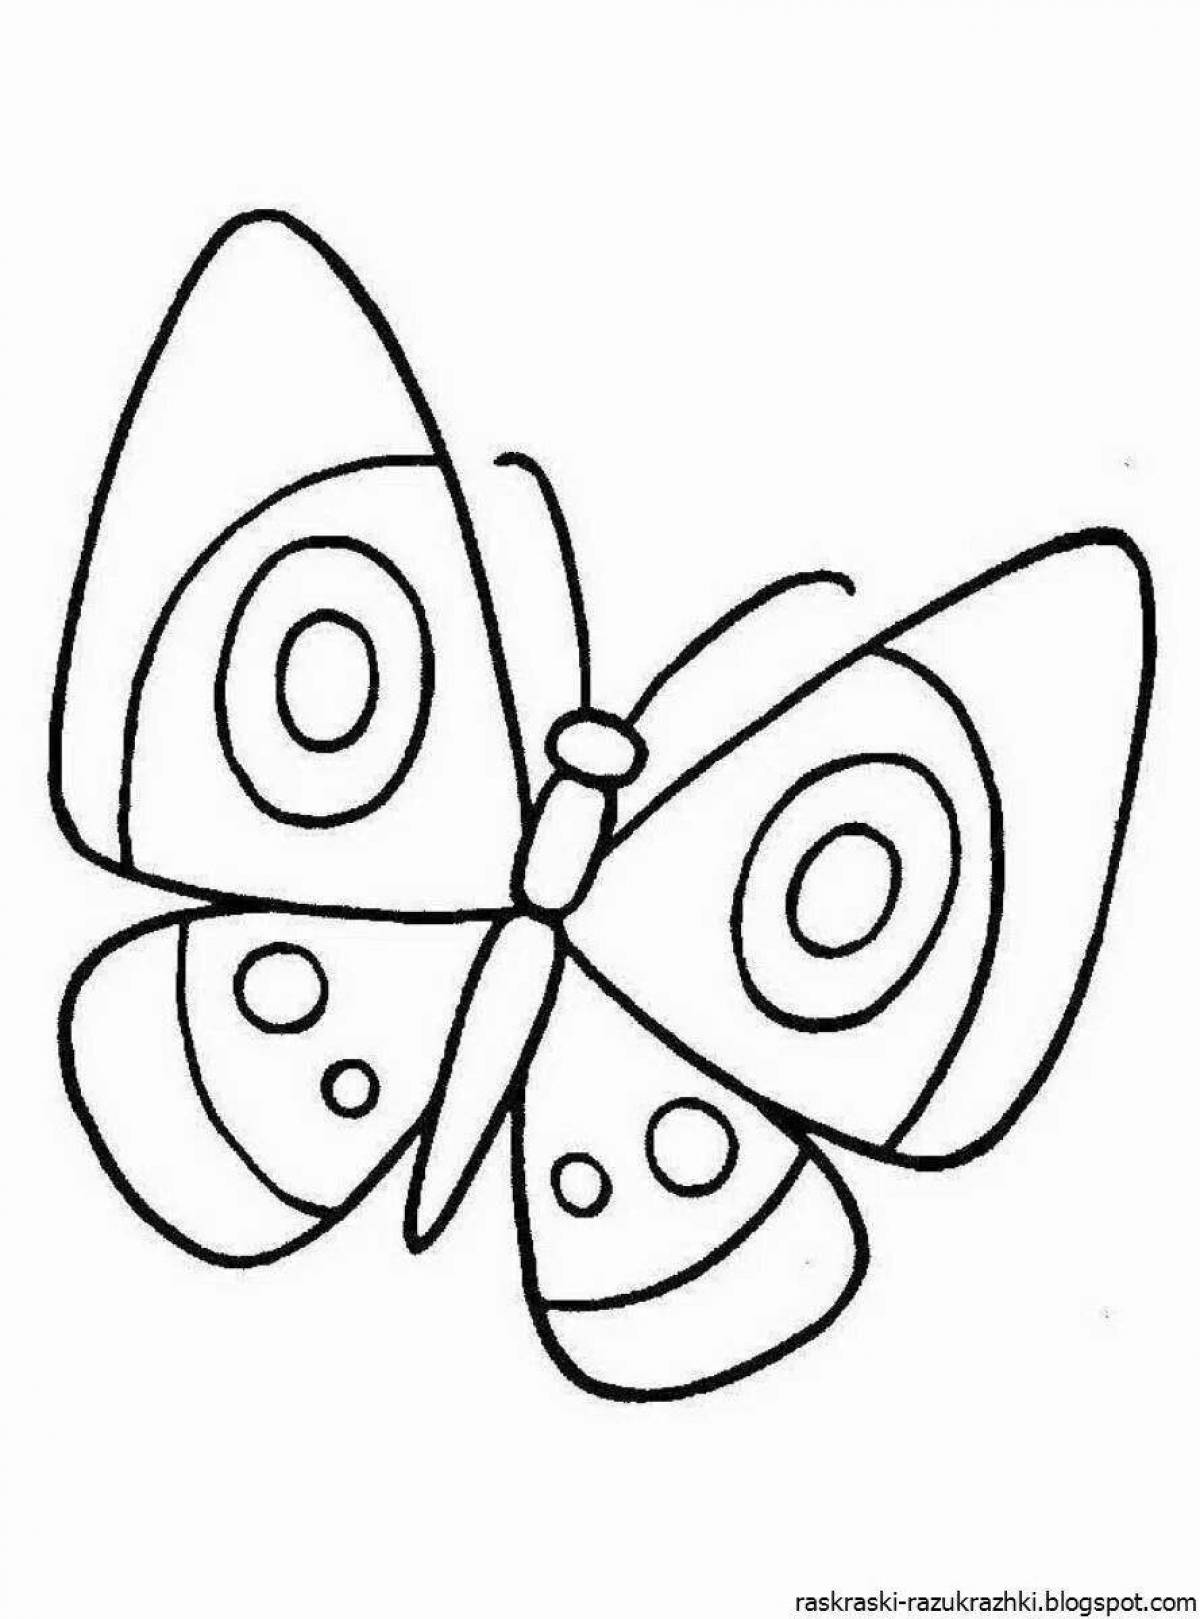 Coloring book shining butterfly for children 4-5 years old